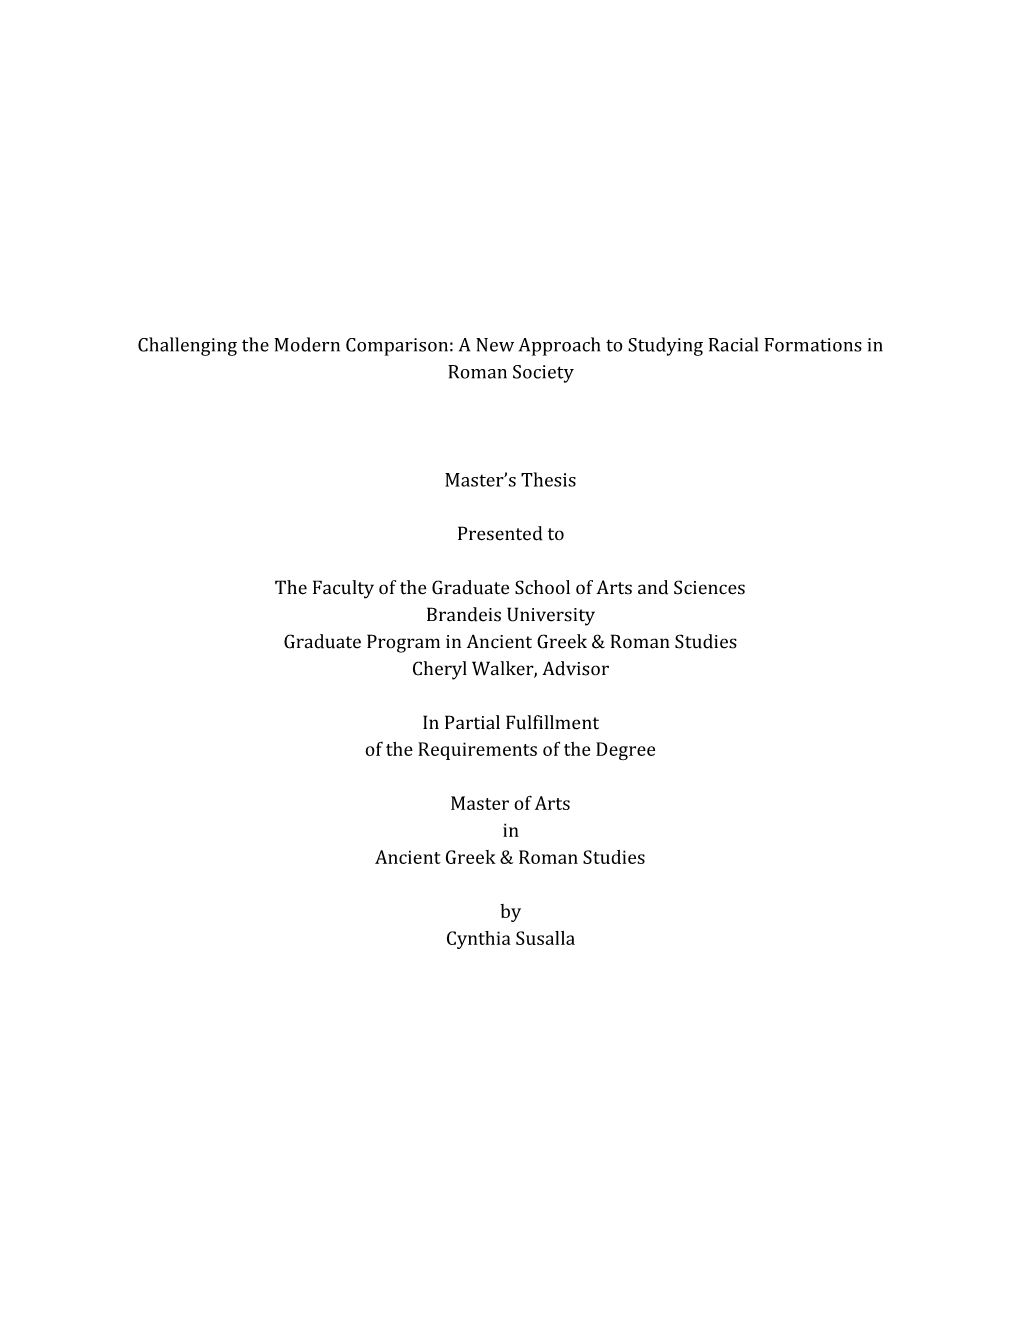 Challenging the Modern Comparison: a New Approach to Studying Racial Formations in Roman Society Master's Thesis Presented To